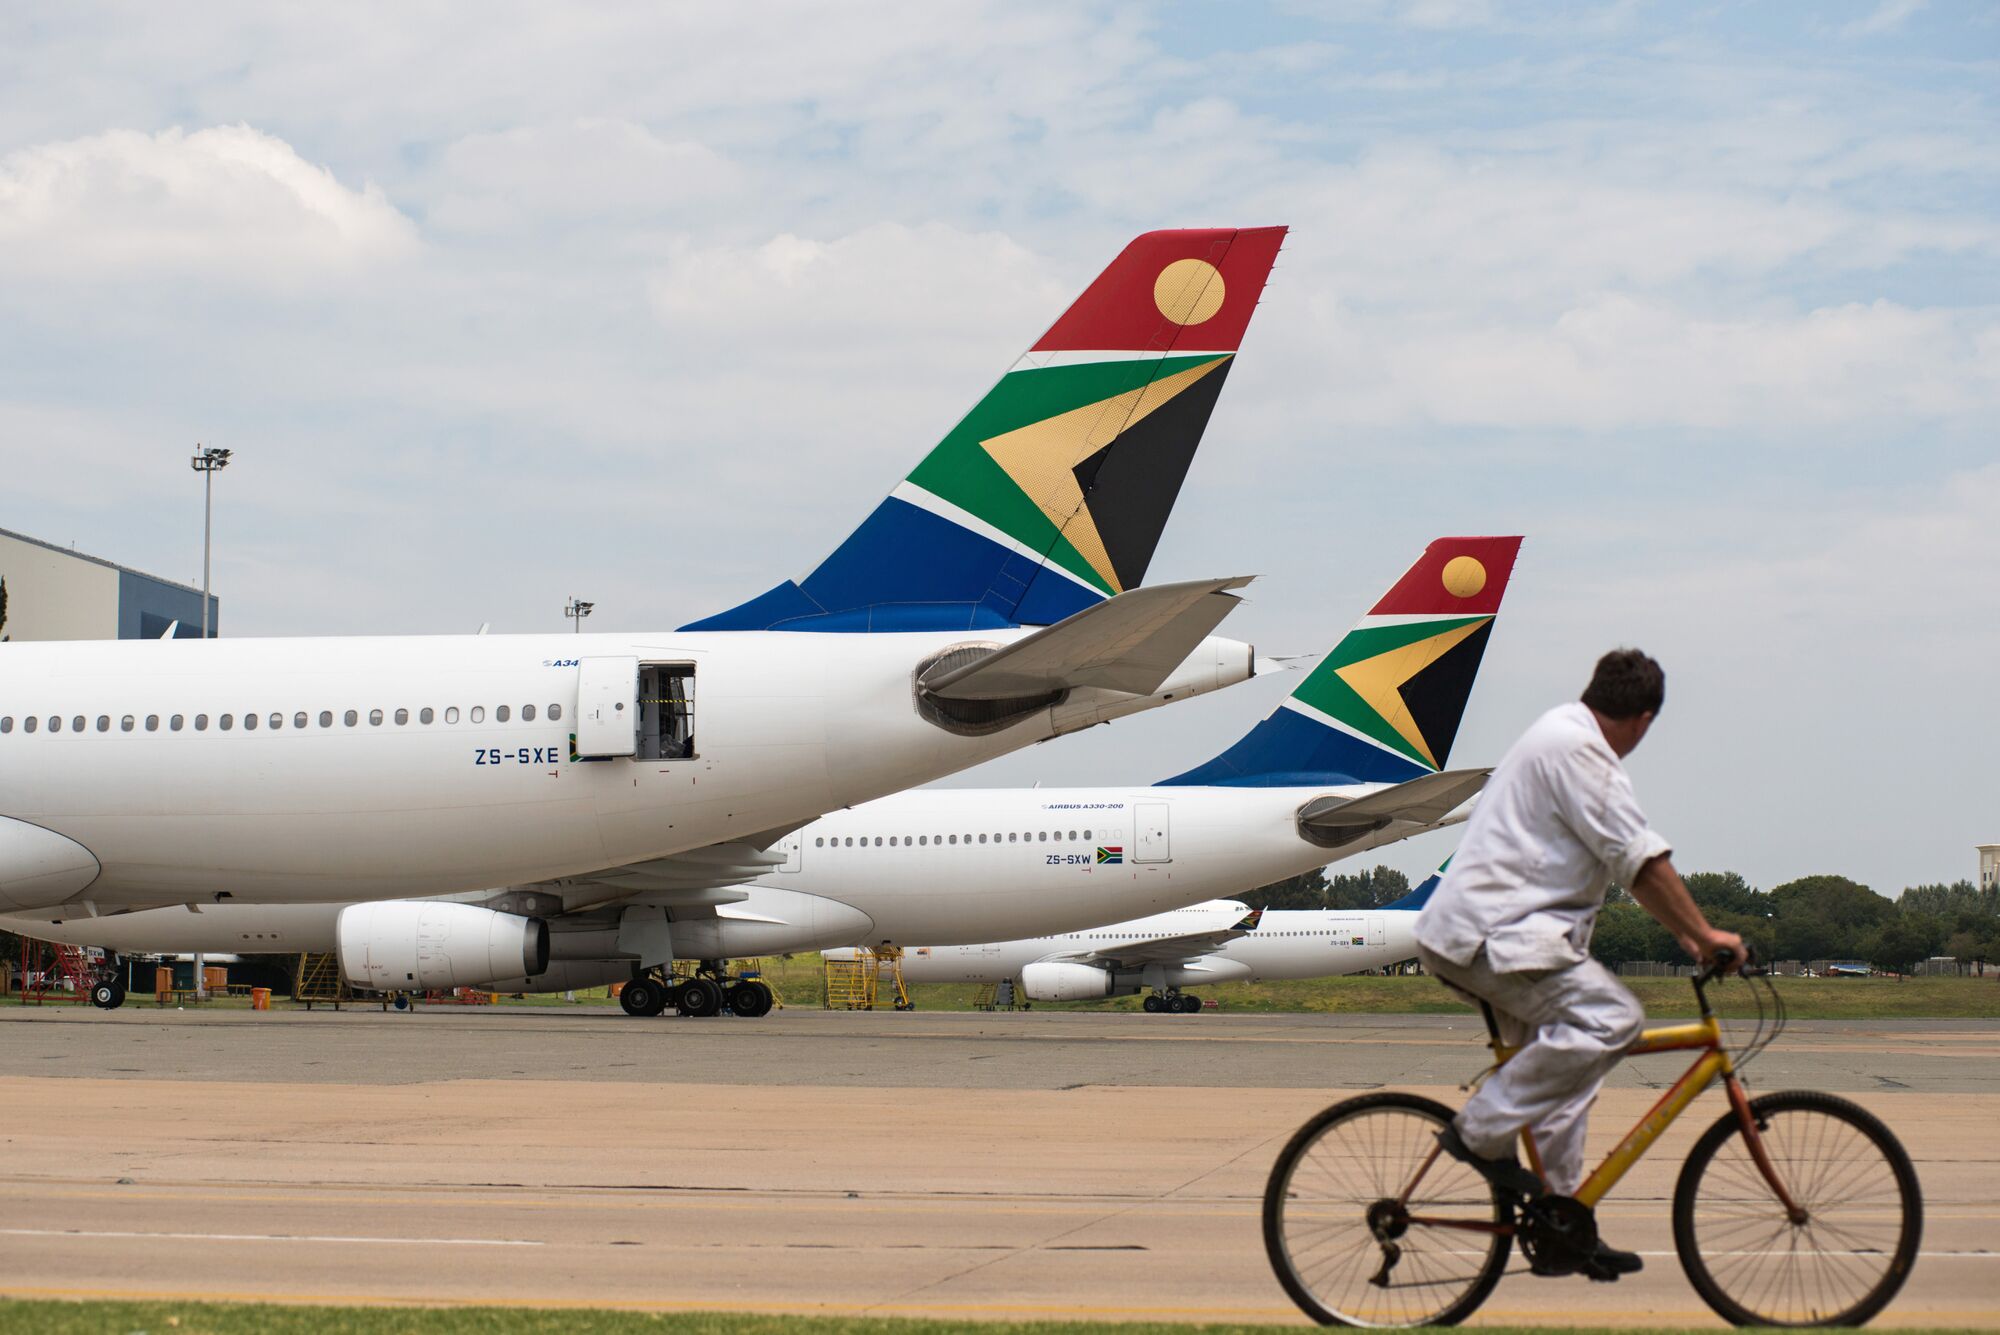 A man cycles past South African Airways branded aircraft at O.R. Tambo International airport in Johannesburg.